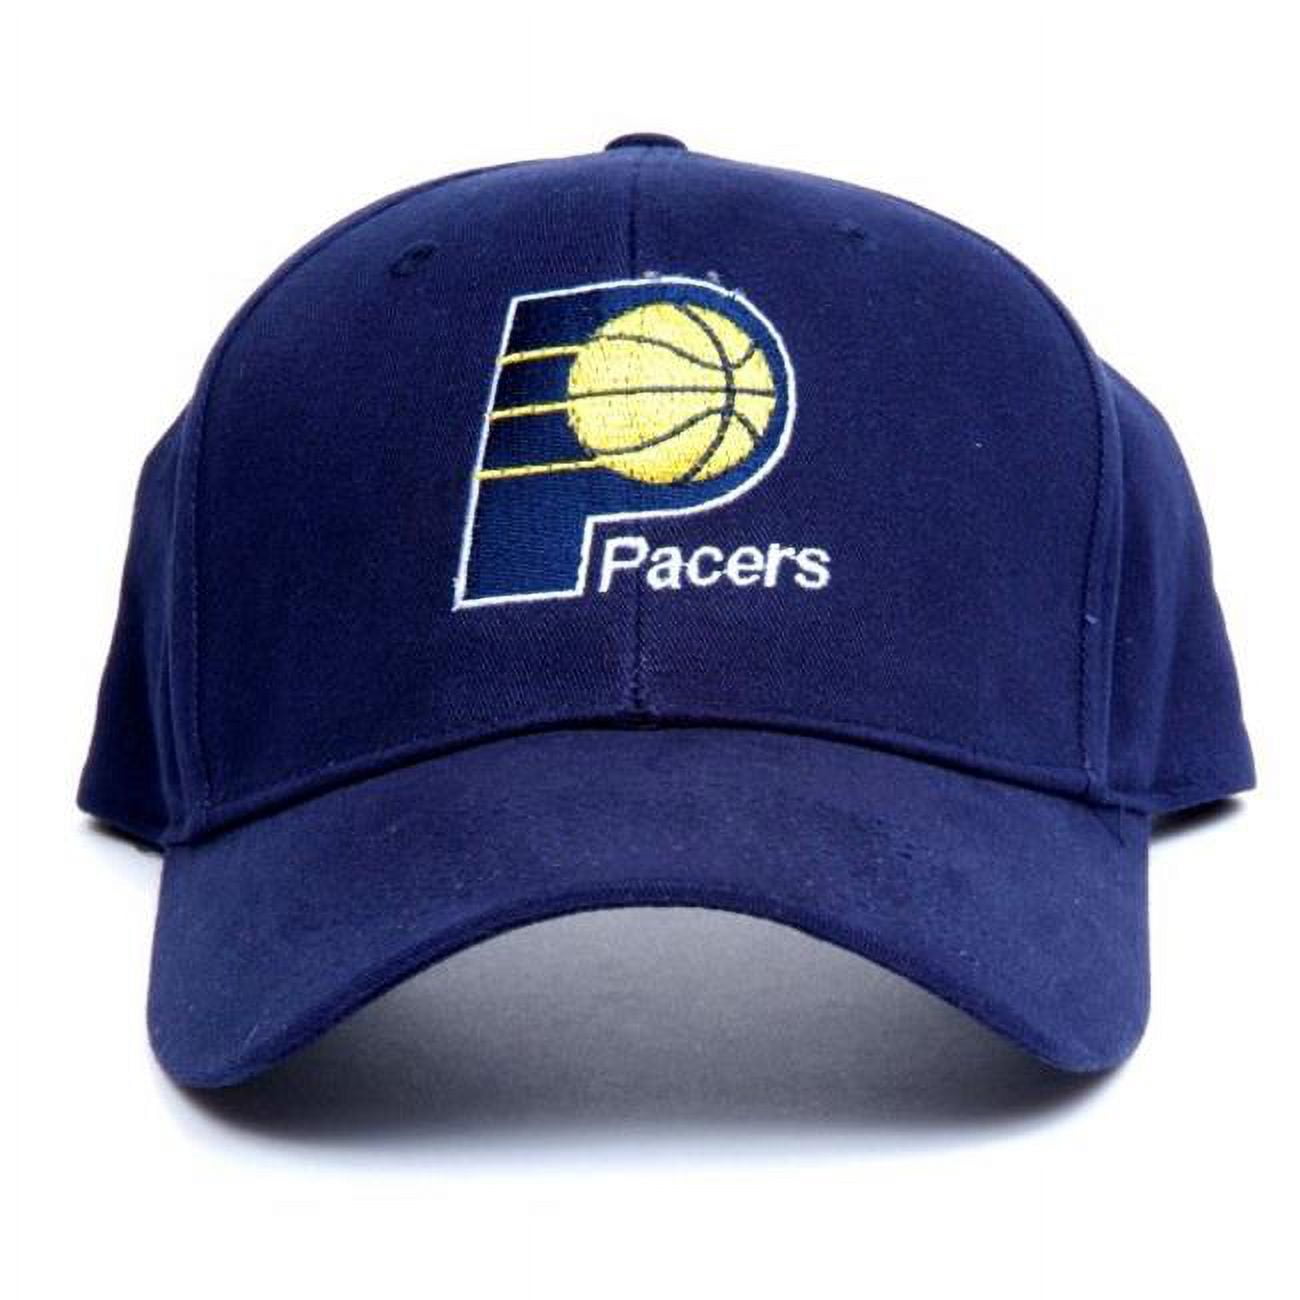 Picture of Blinkee 2870000 Indiana Pacers Flashing Fiber Optic Cap